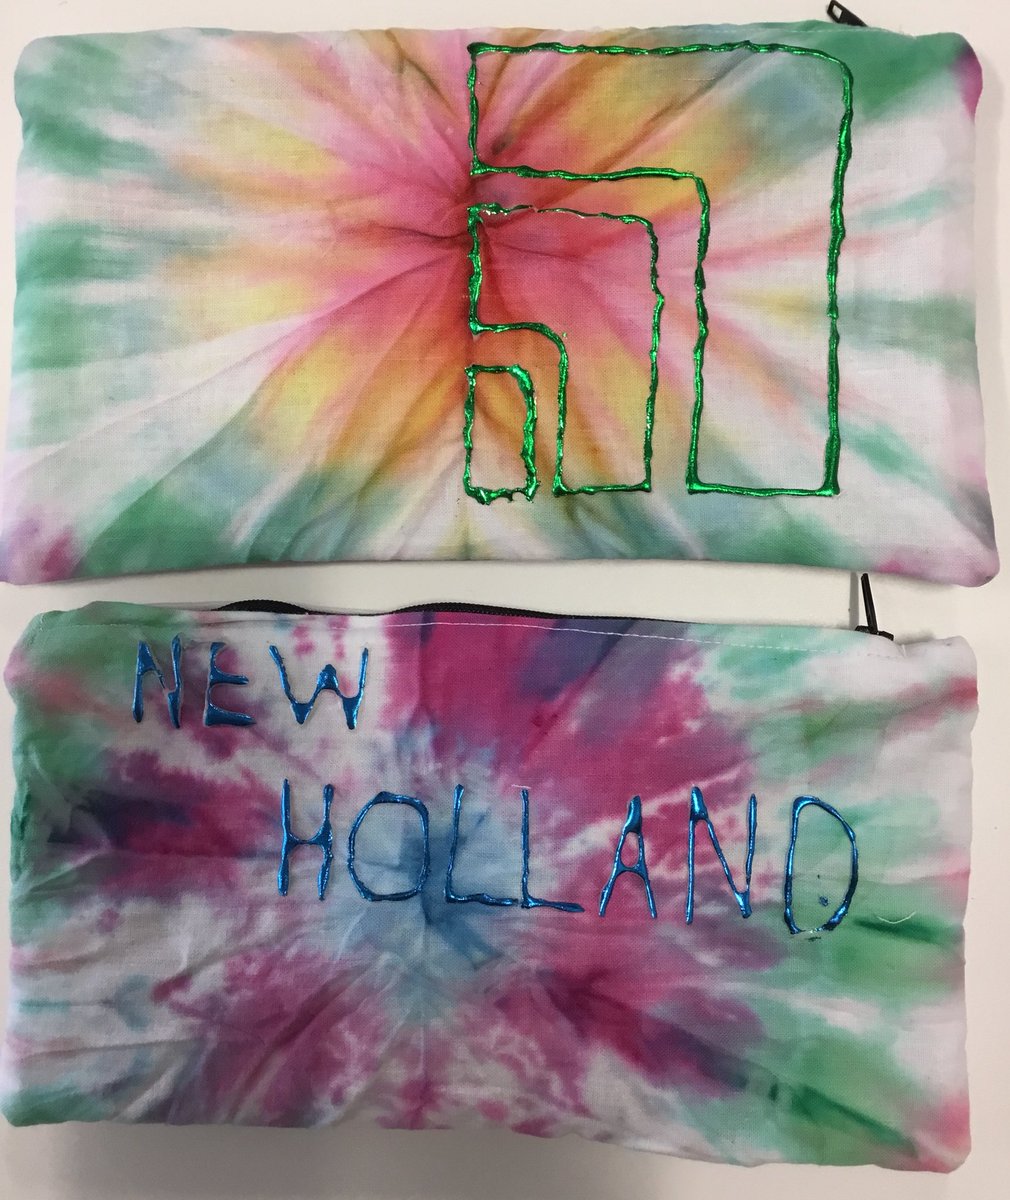 Brightening up a traditional tie dye using foil printing. #textiles #dttextiles